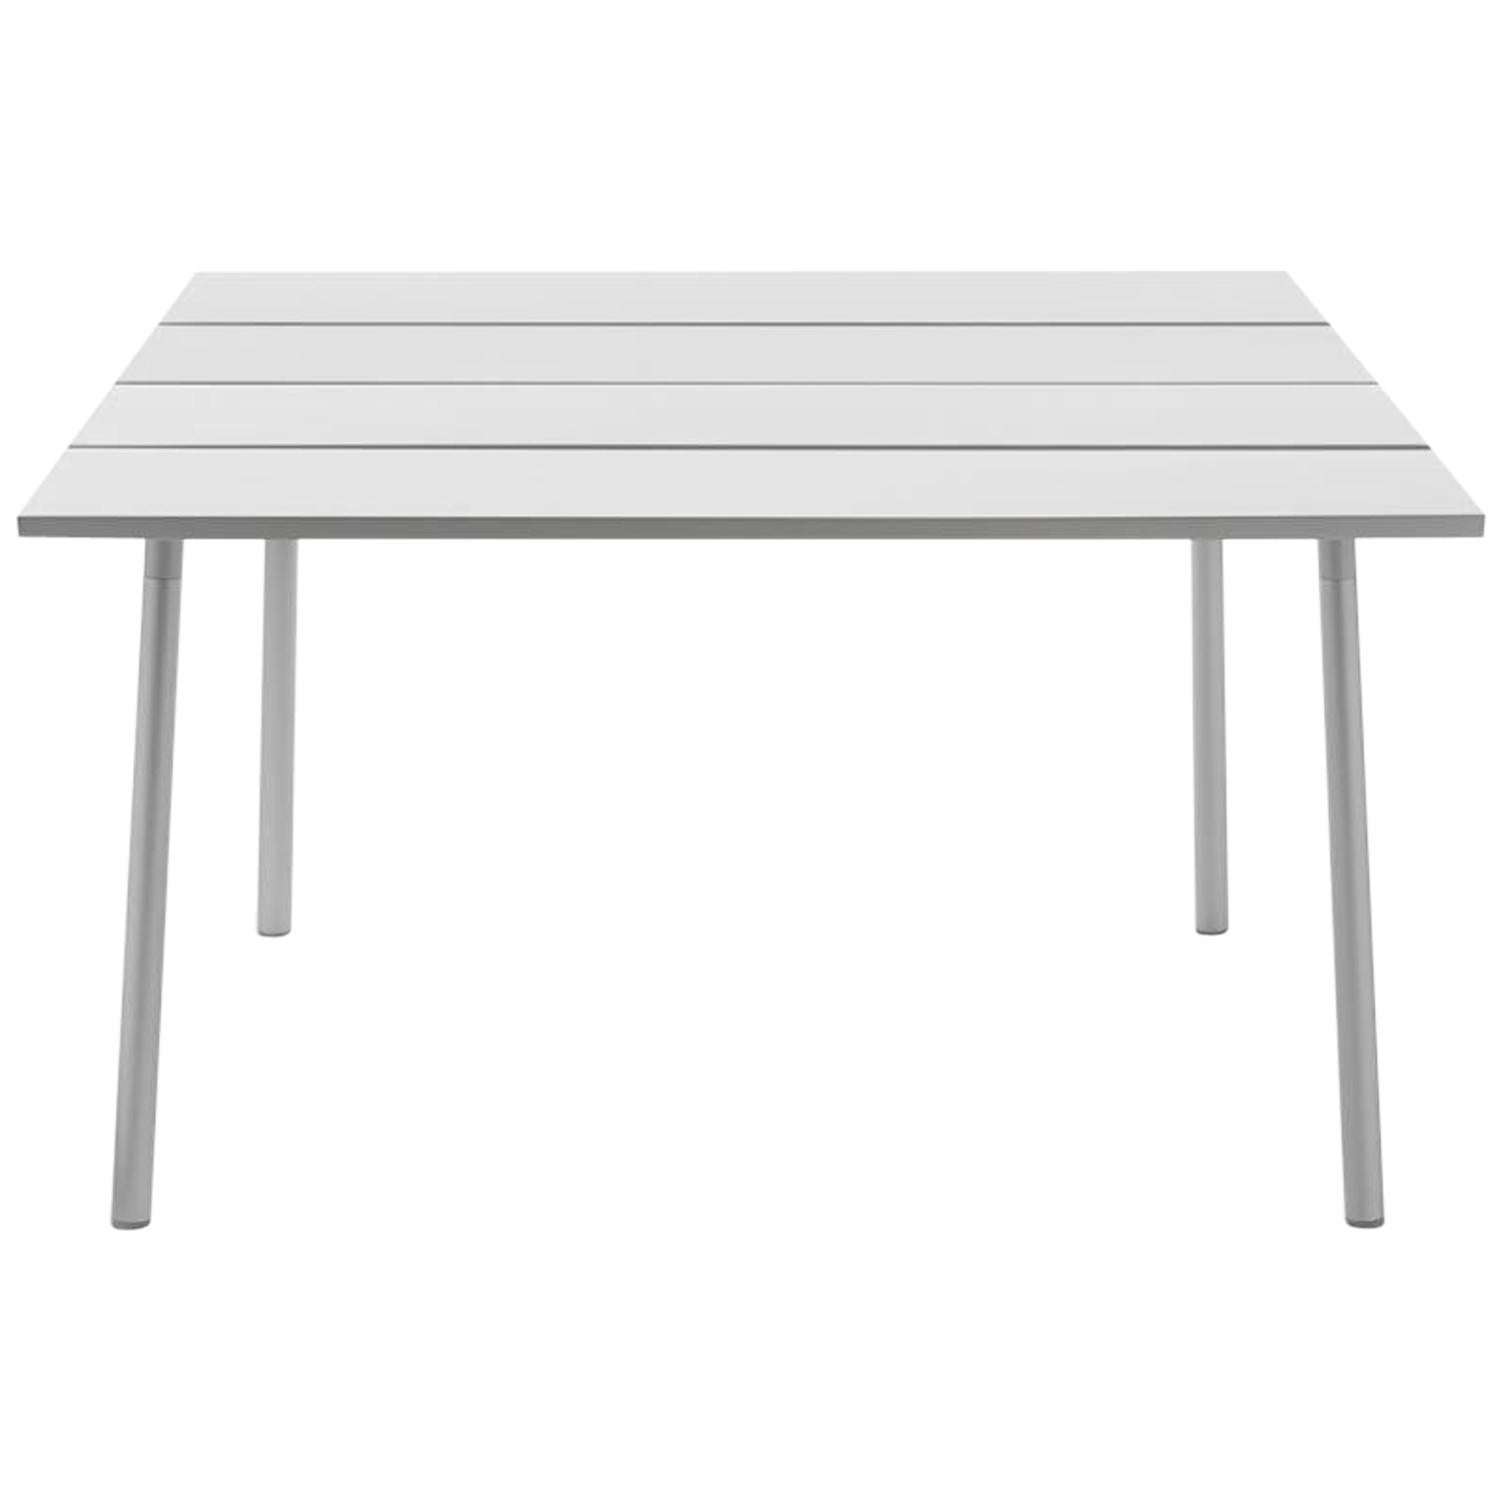 Emeco Run Medium Table in Clear Anodized Aluminum by Sam Hecht & Kim Colin For Sale